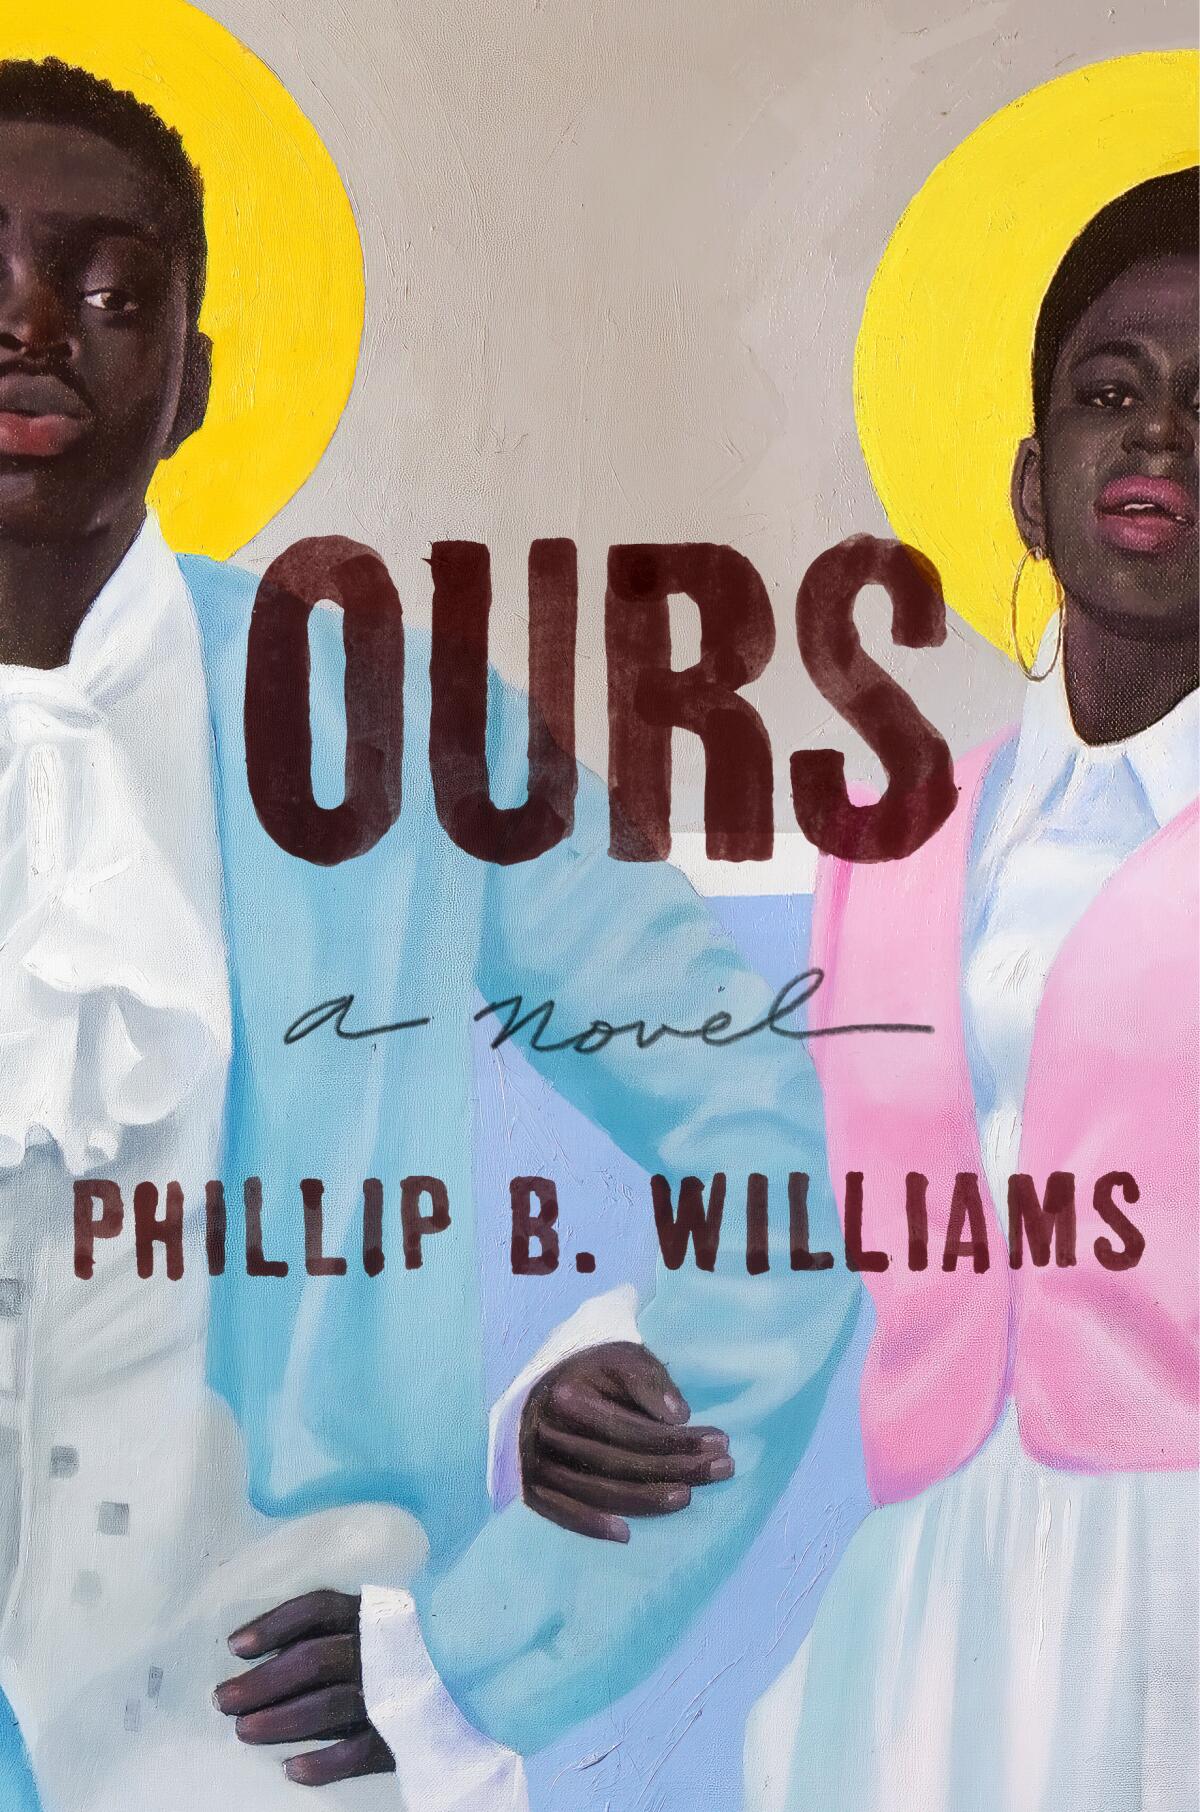 "Ours" by Phillip B. Williams